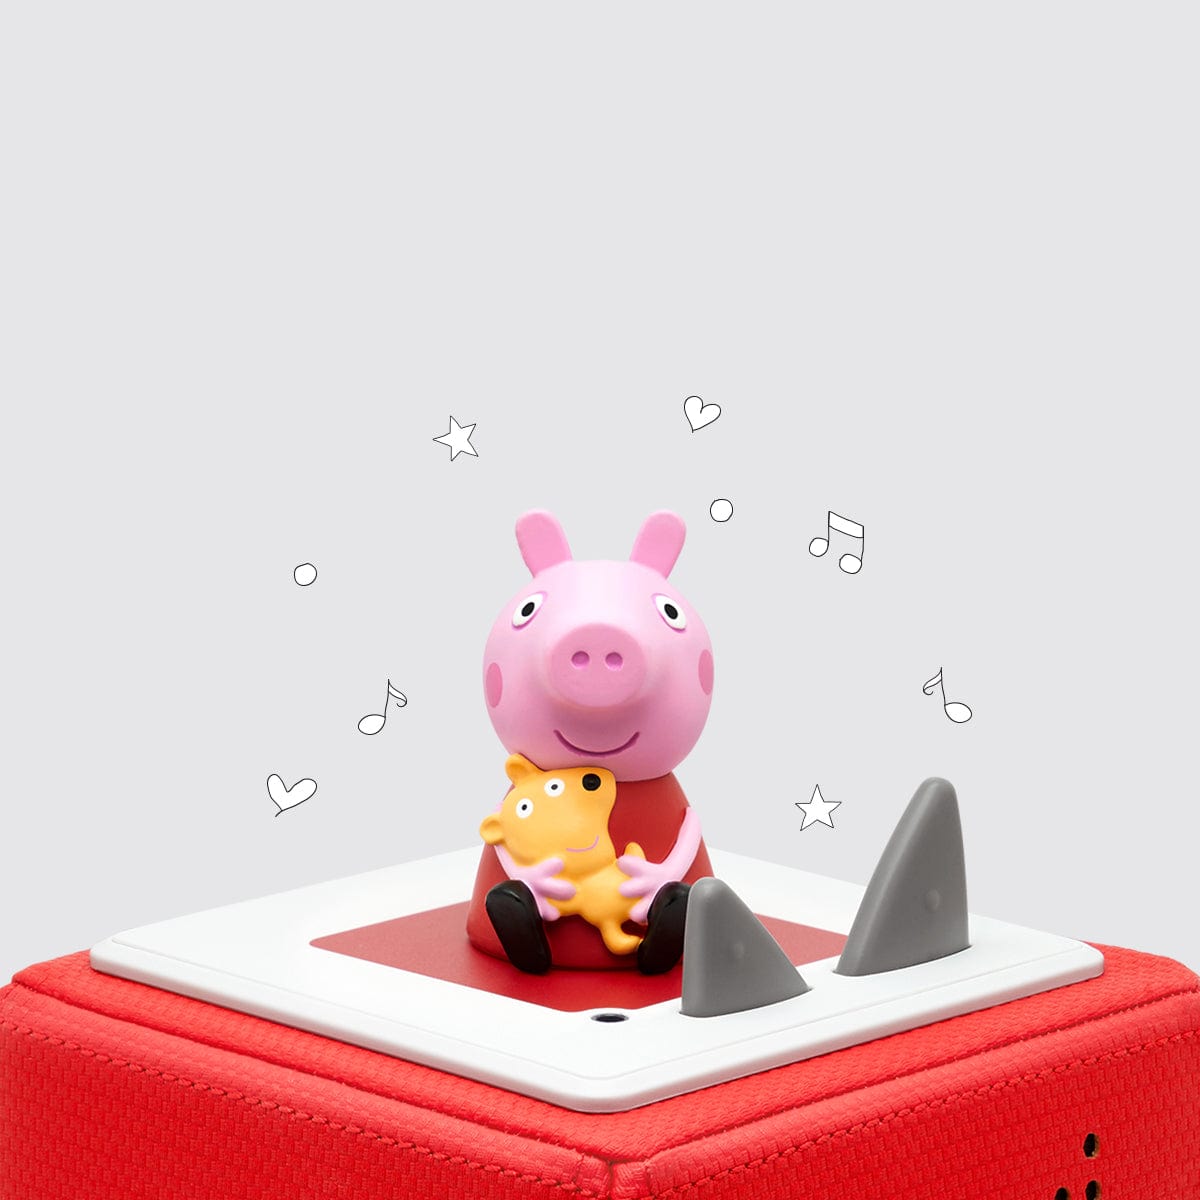 100+] Peppa Pig House Wallpapers, Wallpapers.com in 2023